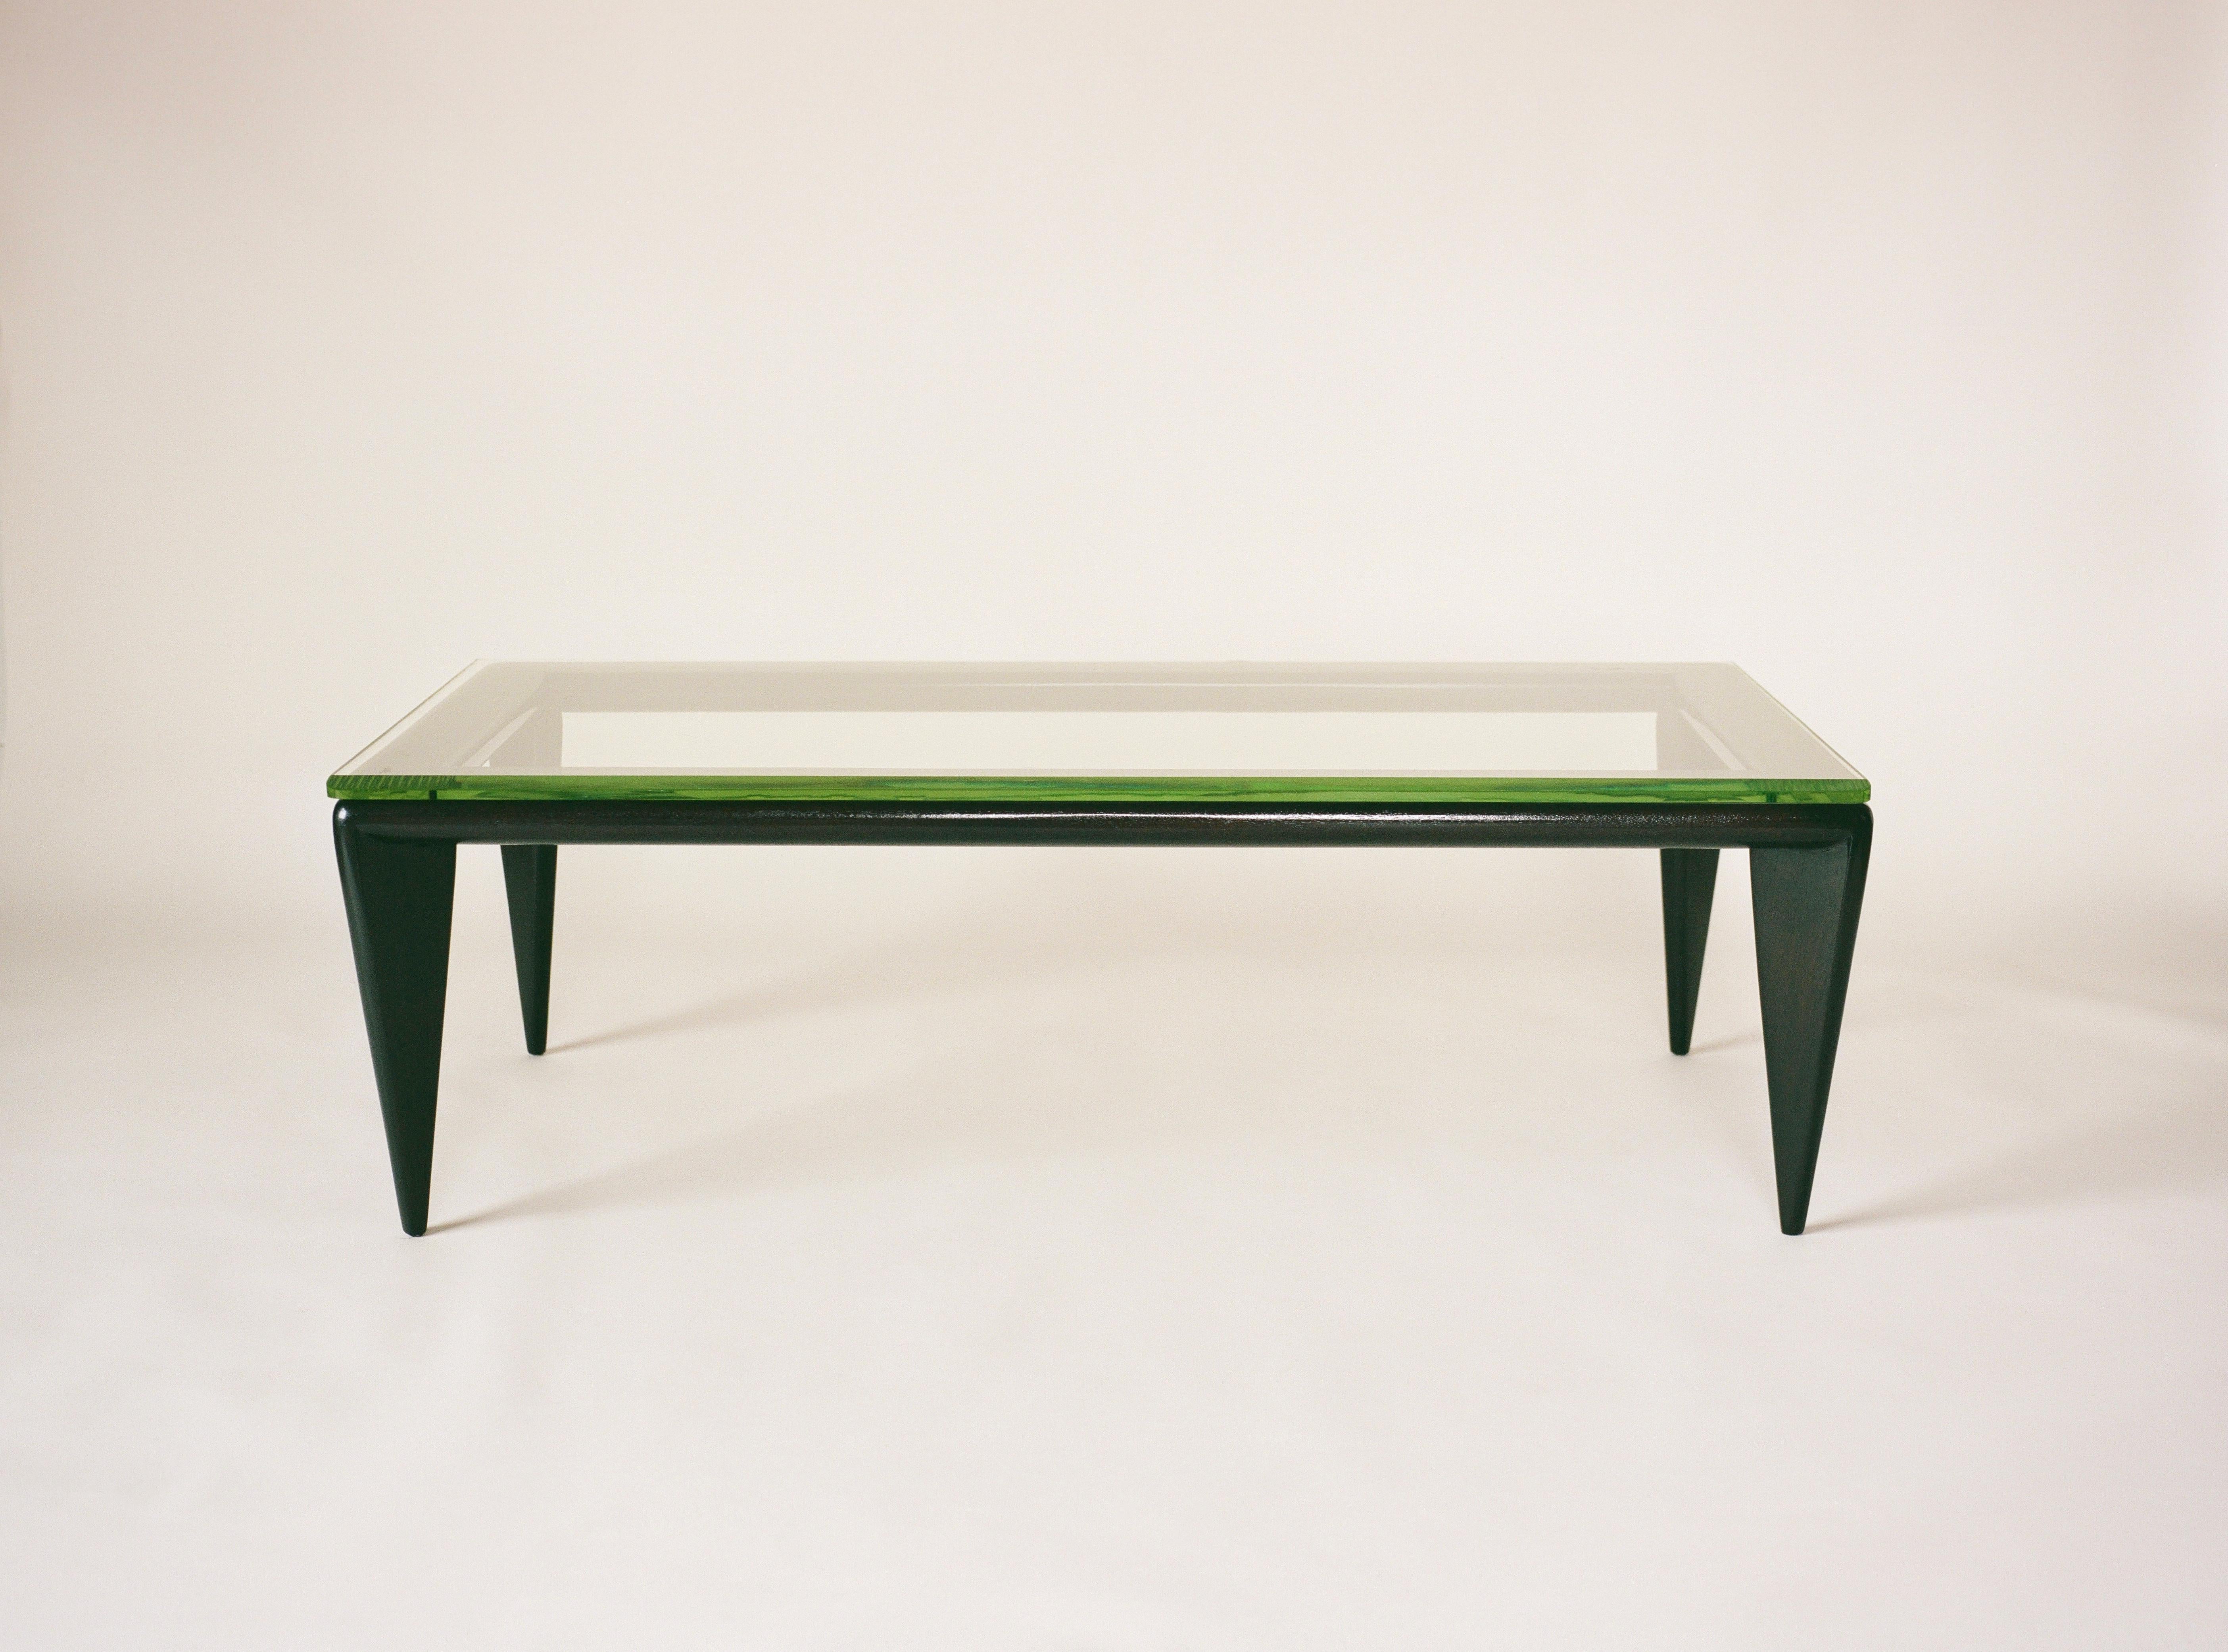 “A custom group designed by T.H. Robsjohn-Gibbings for Widdicomb Furniture Co., Grand Rapids” reads the original print ad that ran in 1948 featuring this table. A dark stained oak wood base supports a thick cut, bevelled glass top with an emerald